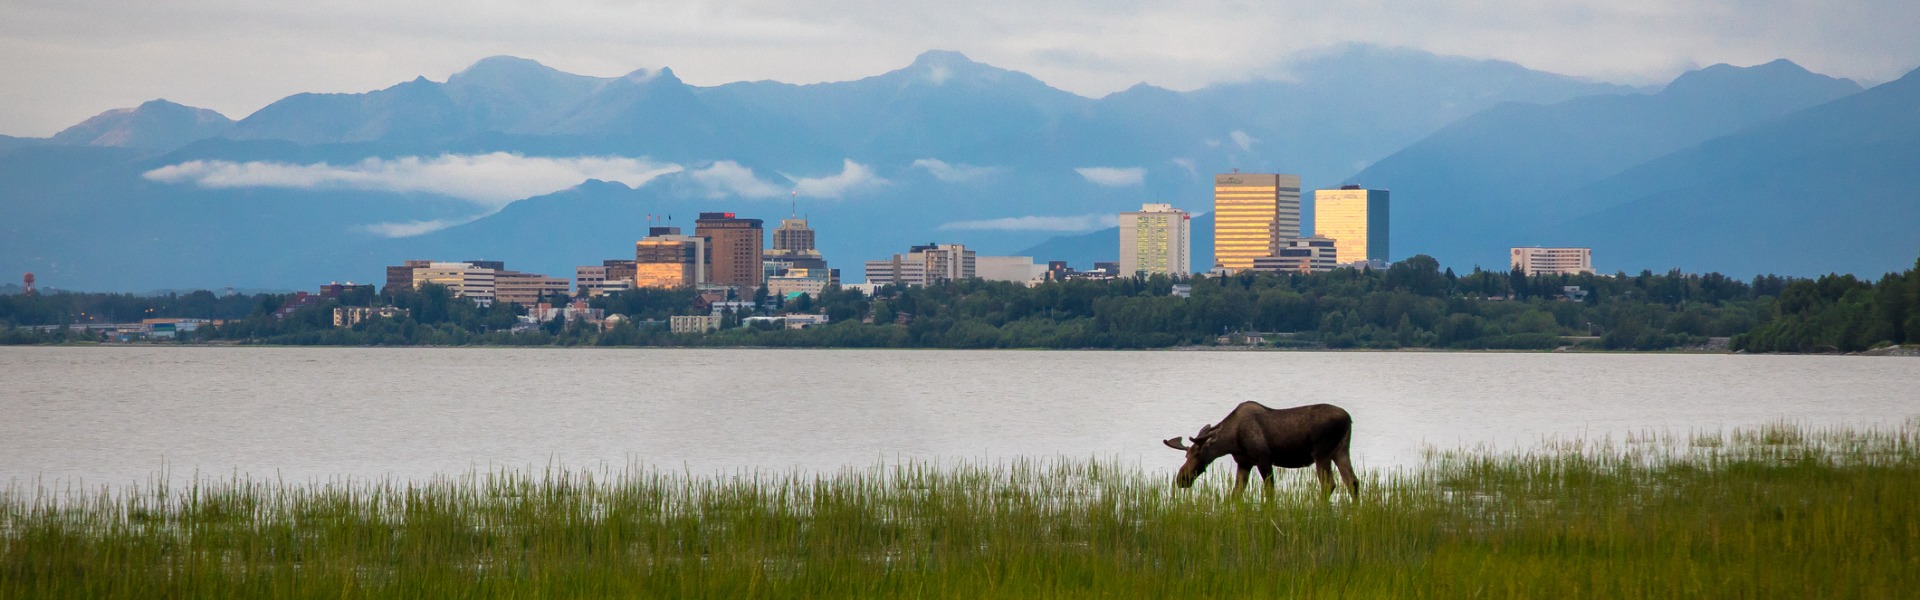 City skyline with moose in foreground